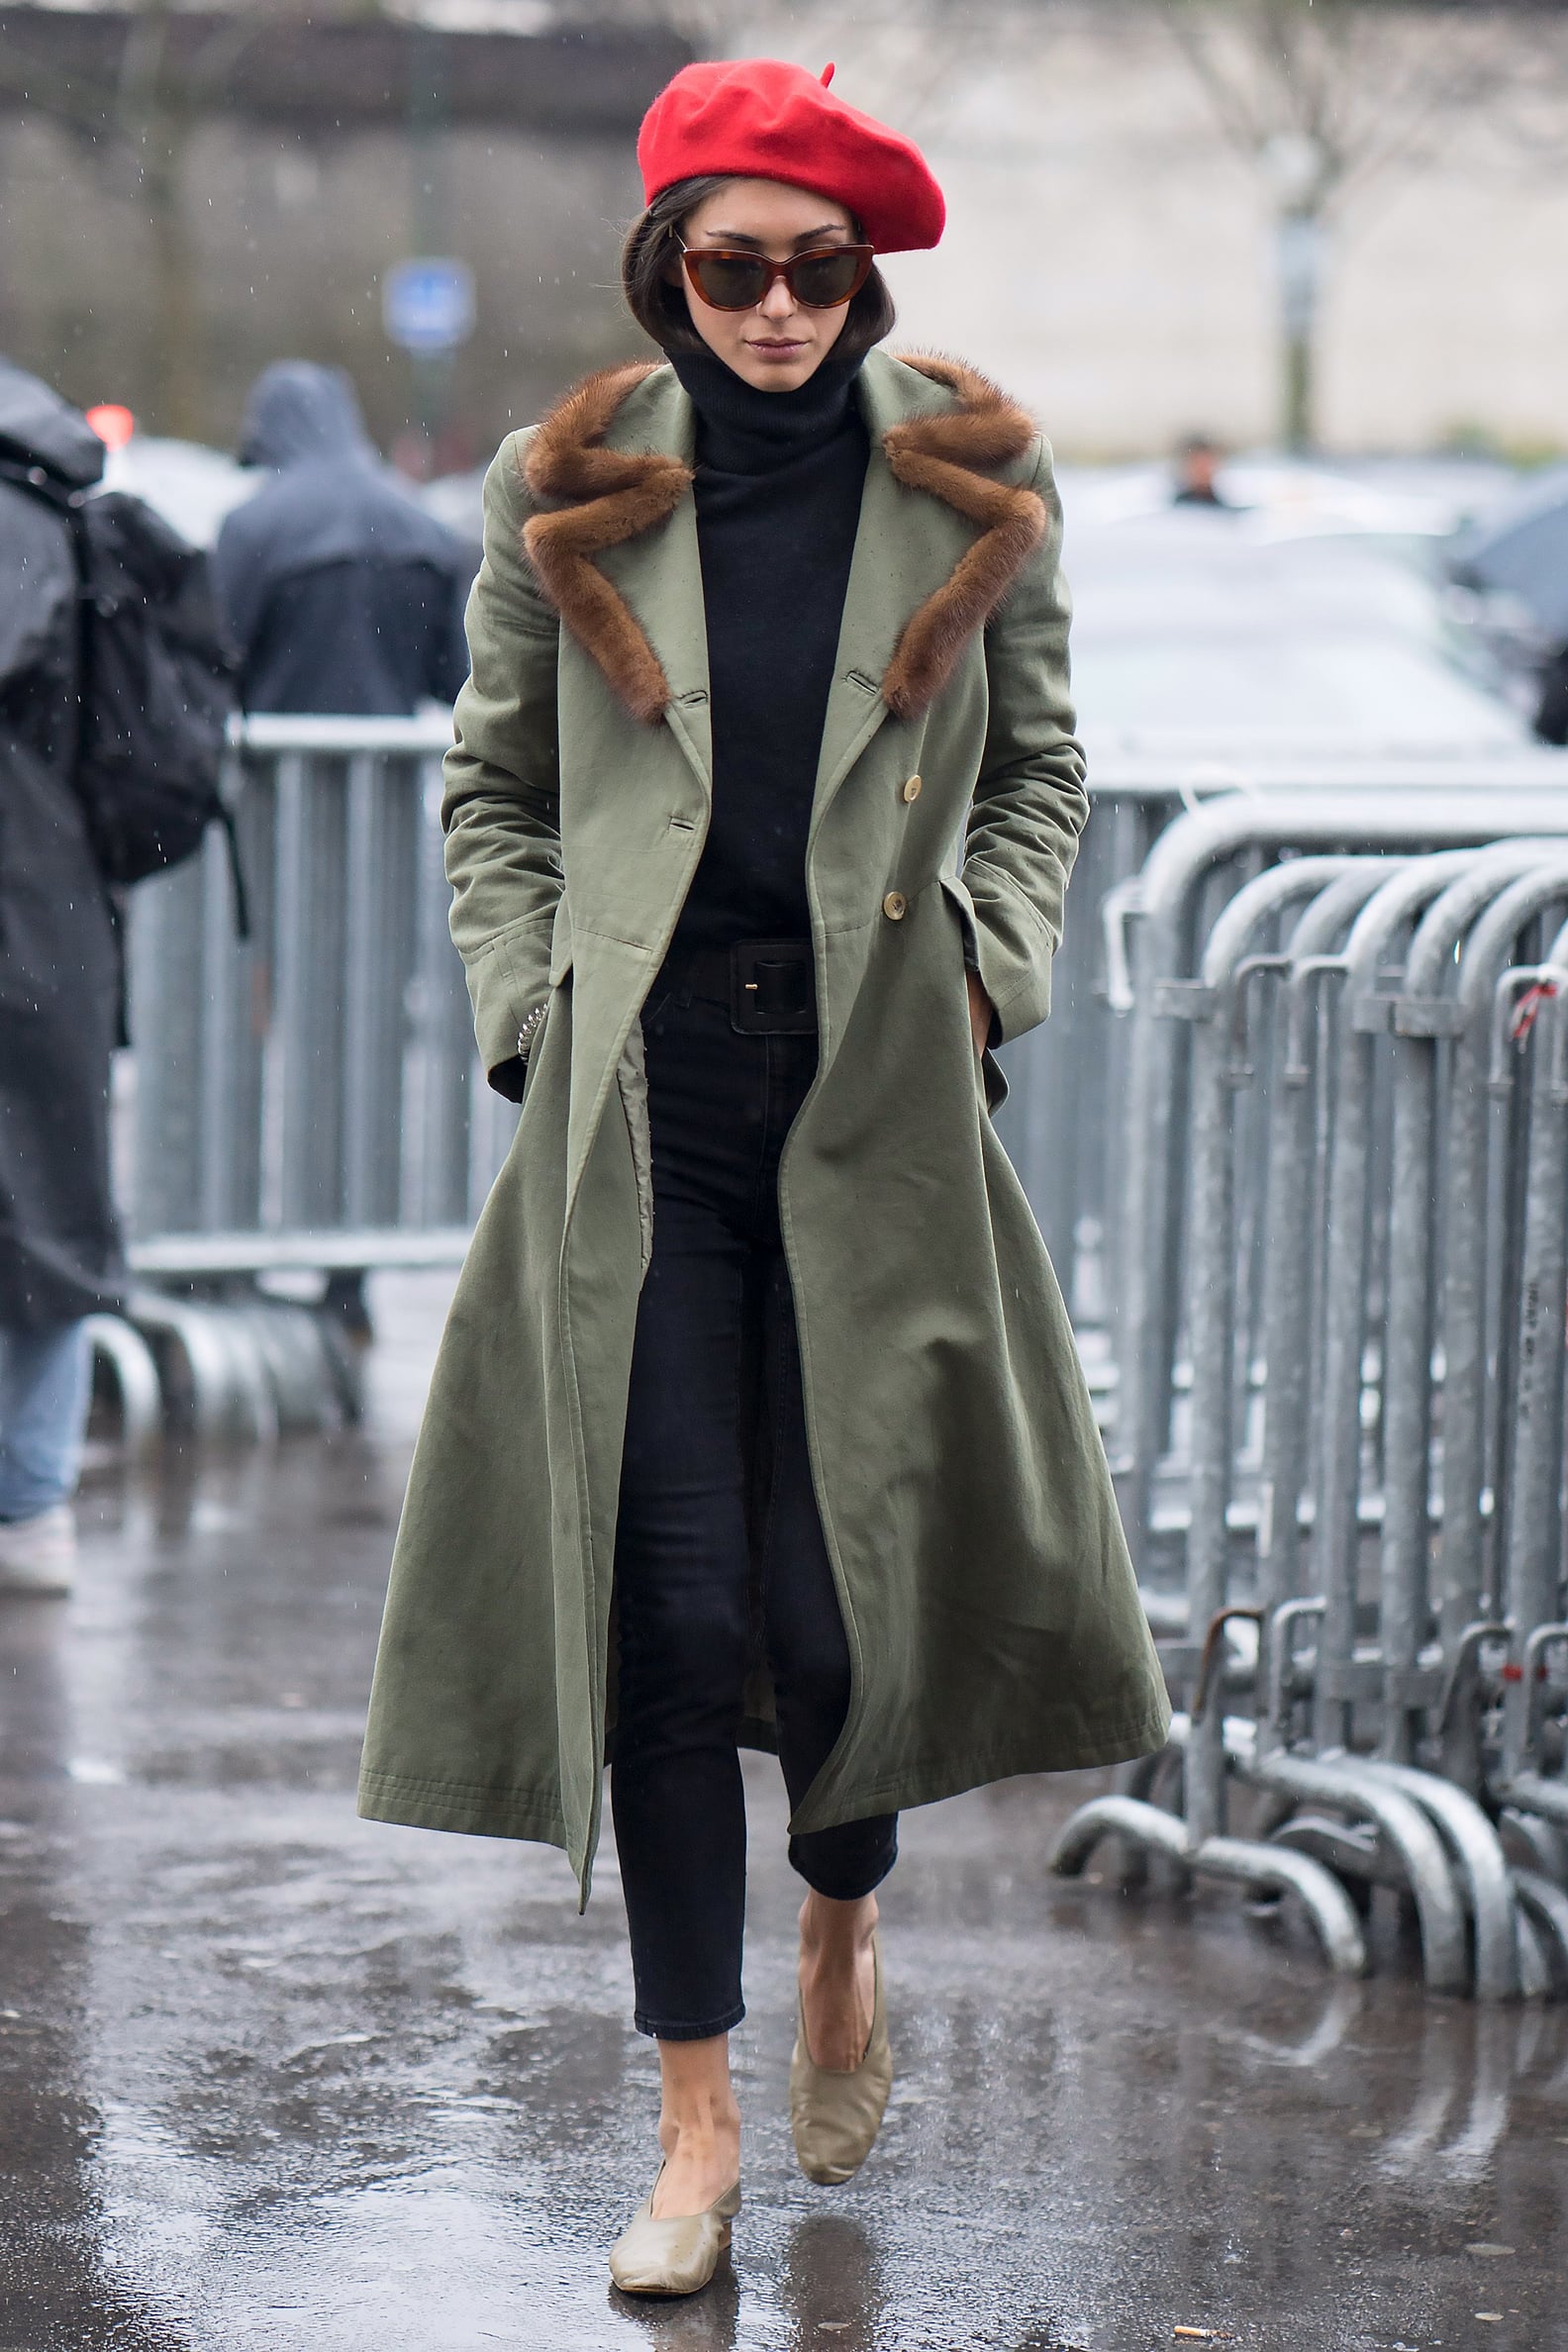 What Coats Are Worth the Money? | POPSUGAR Fashion